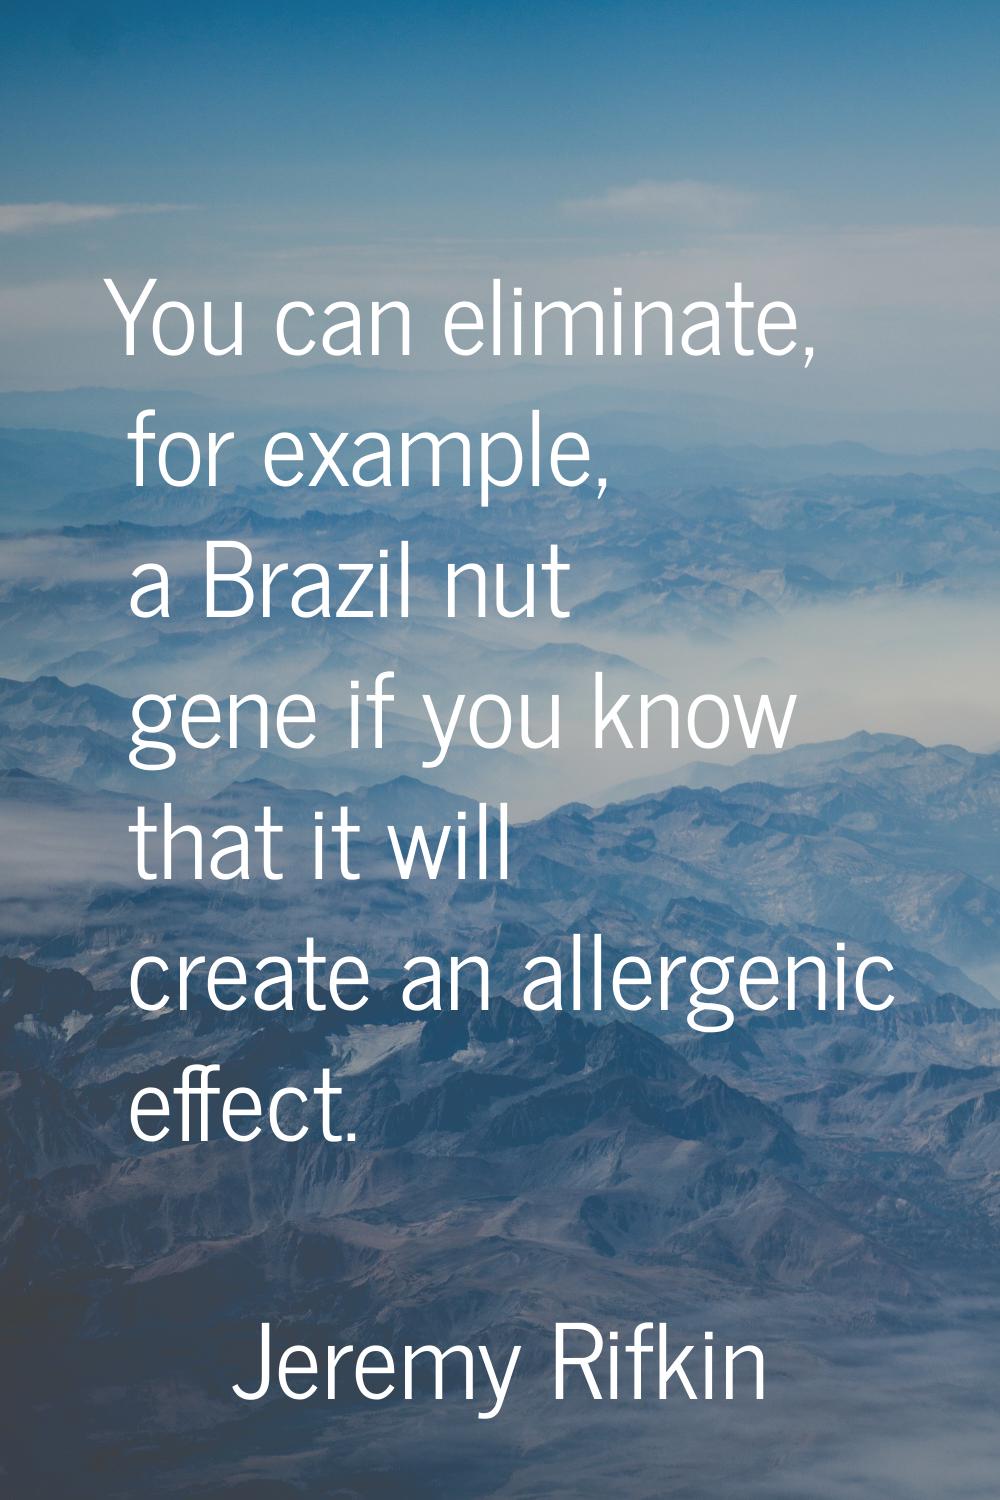 You can eliminate, for example, a Brazil nut gene if you know that it will create an allergenic eff